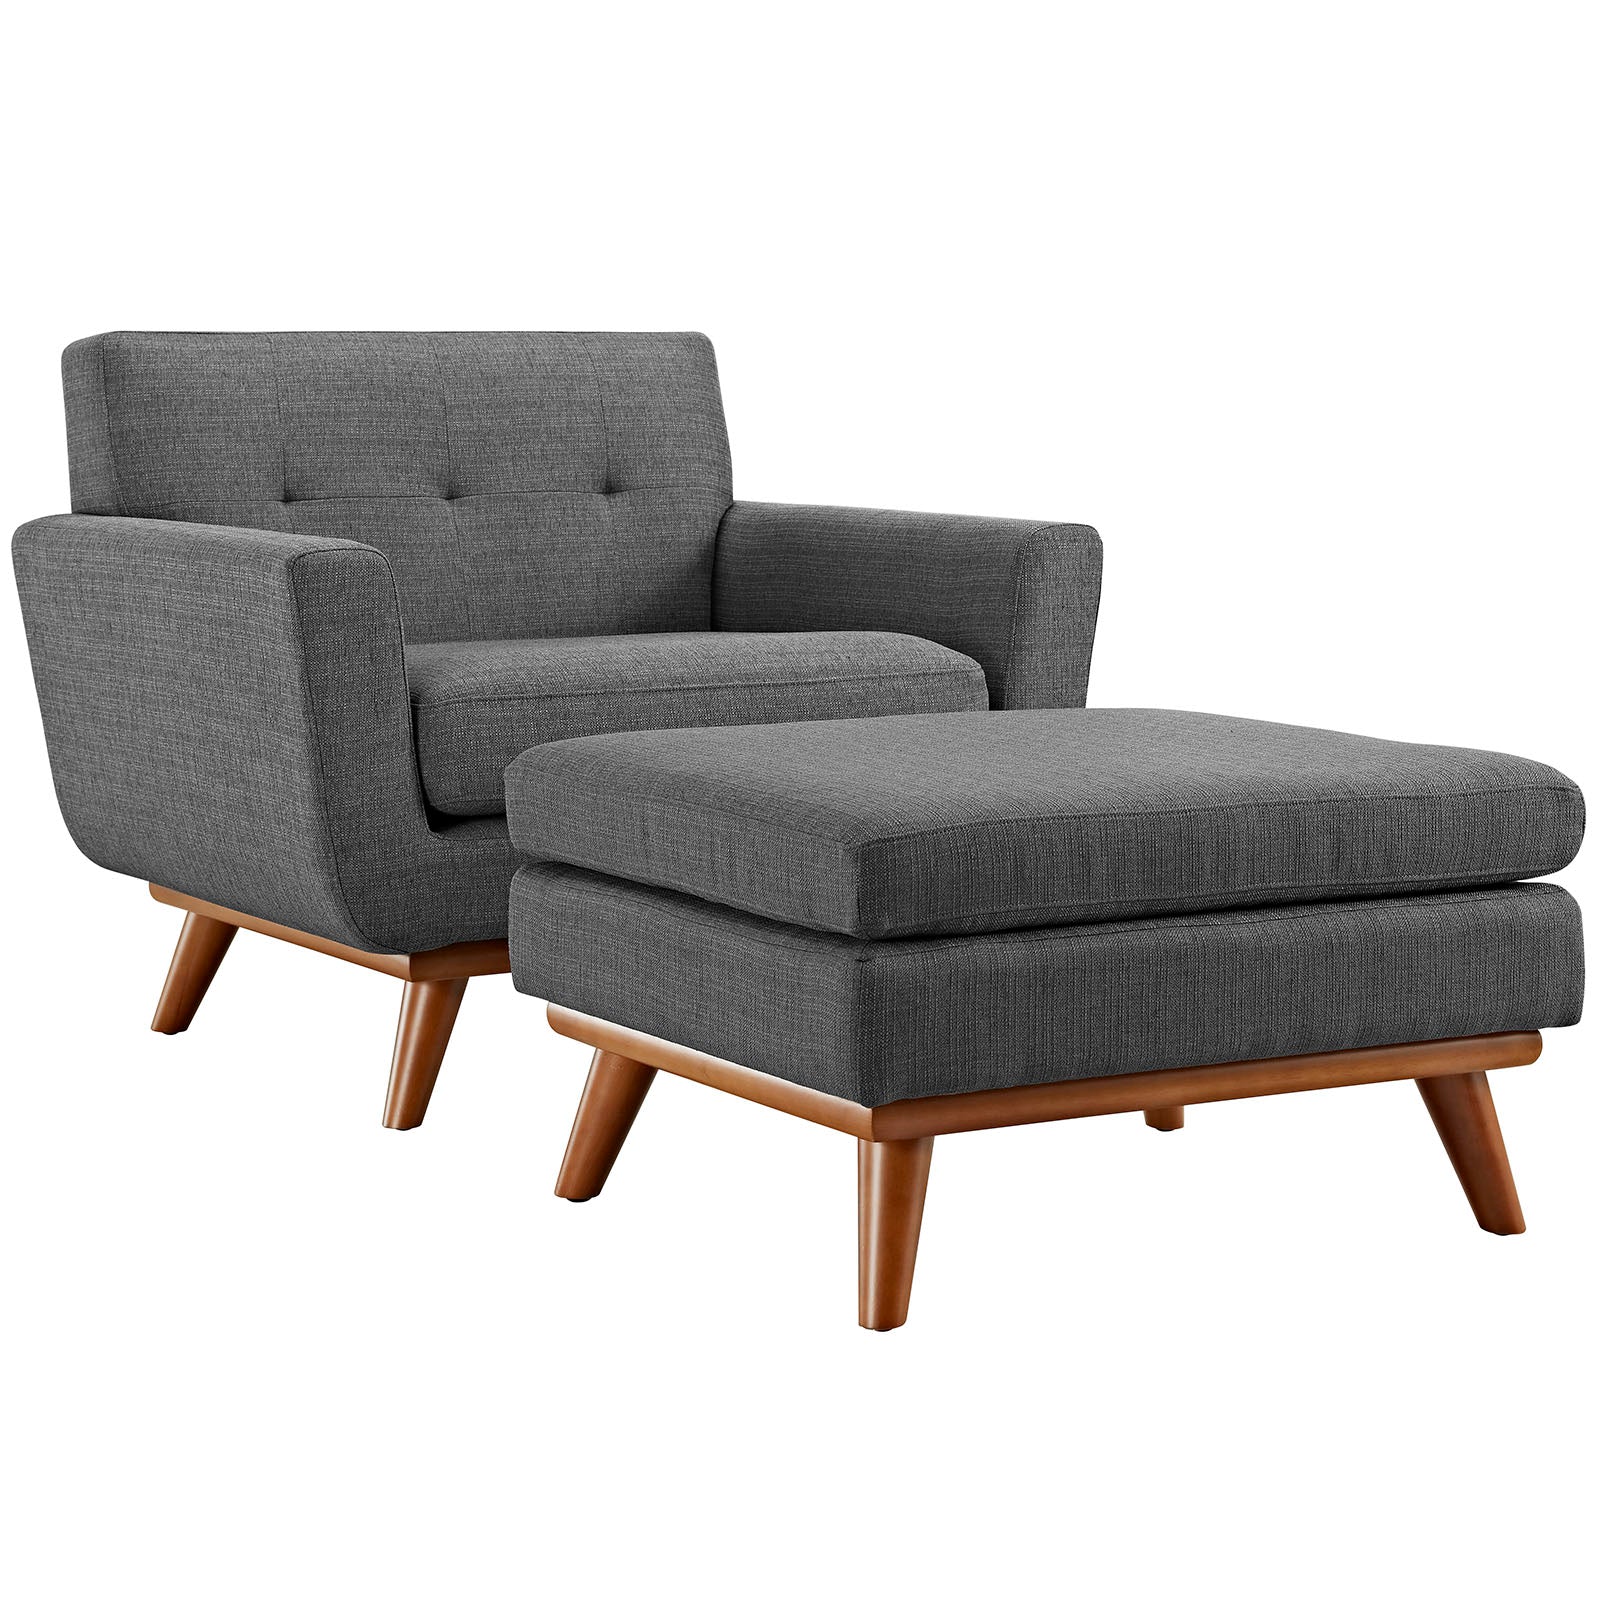 Modway Living Room Sets - Engage 2 Piece Armchair and Ottoman Gray